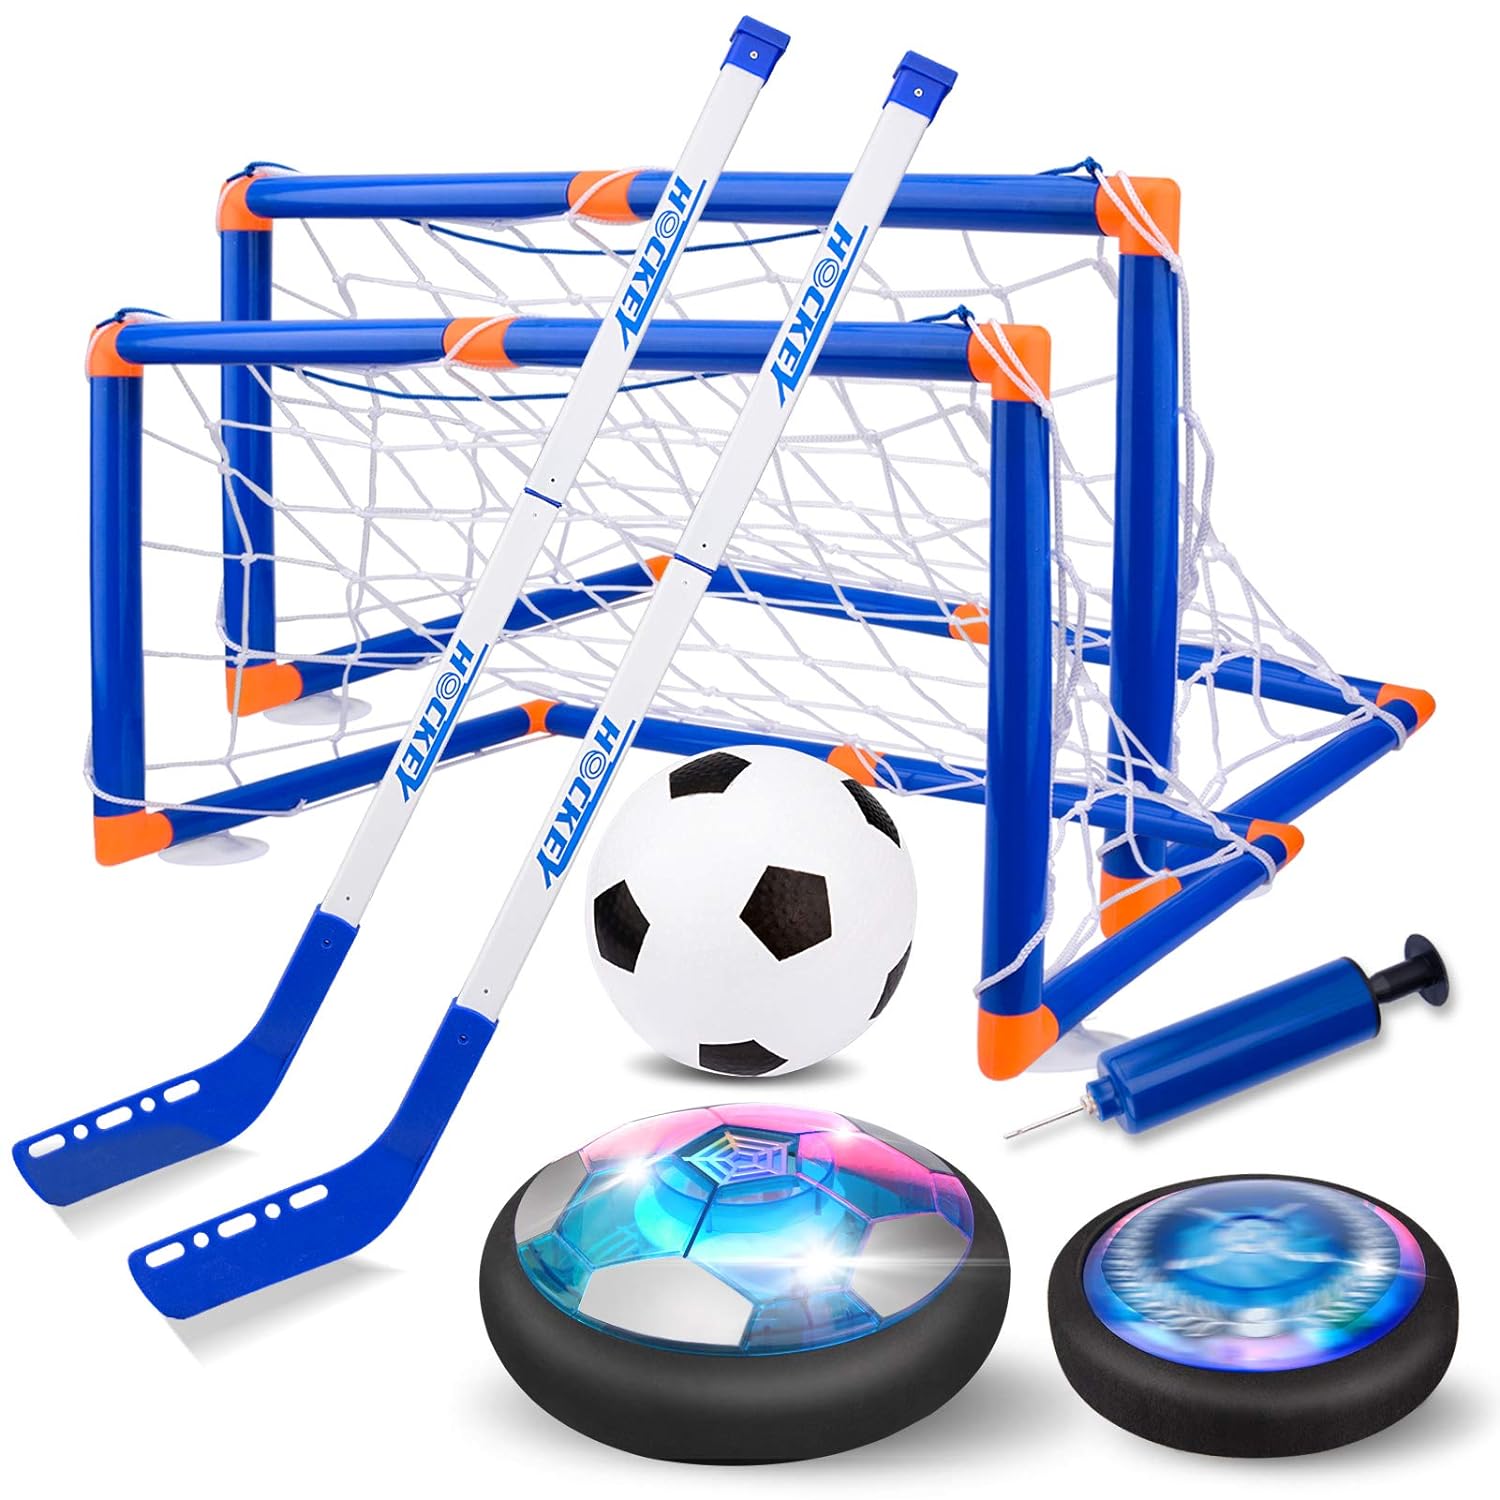 thinkstar 3-In-1 Hover Hockey Soccer Ball Kids Toys Set, Led Lights Floating Air Football, Indoor Outdoor Sport Toys For Kids, Chris?